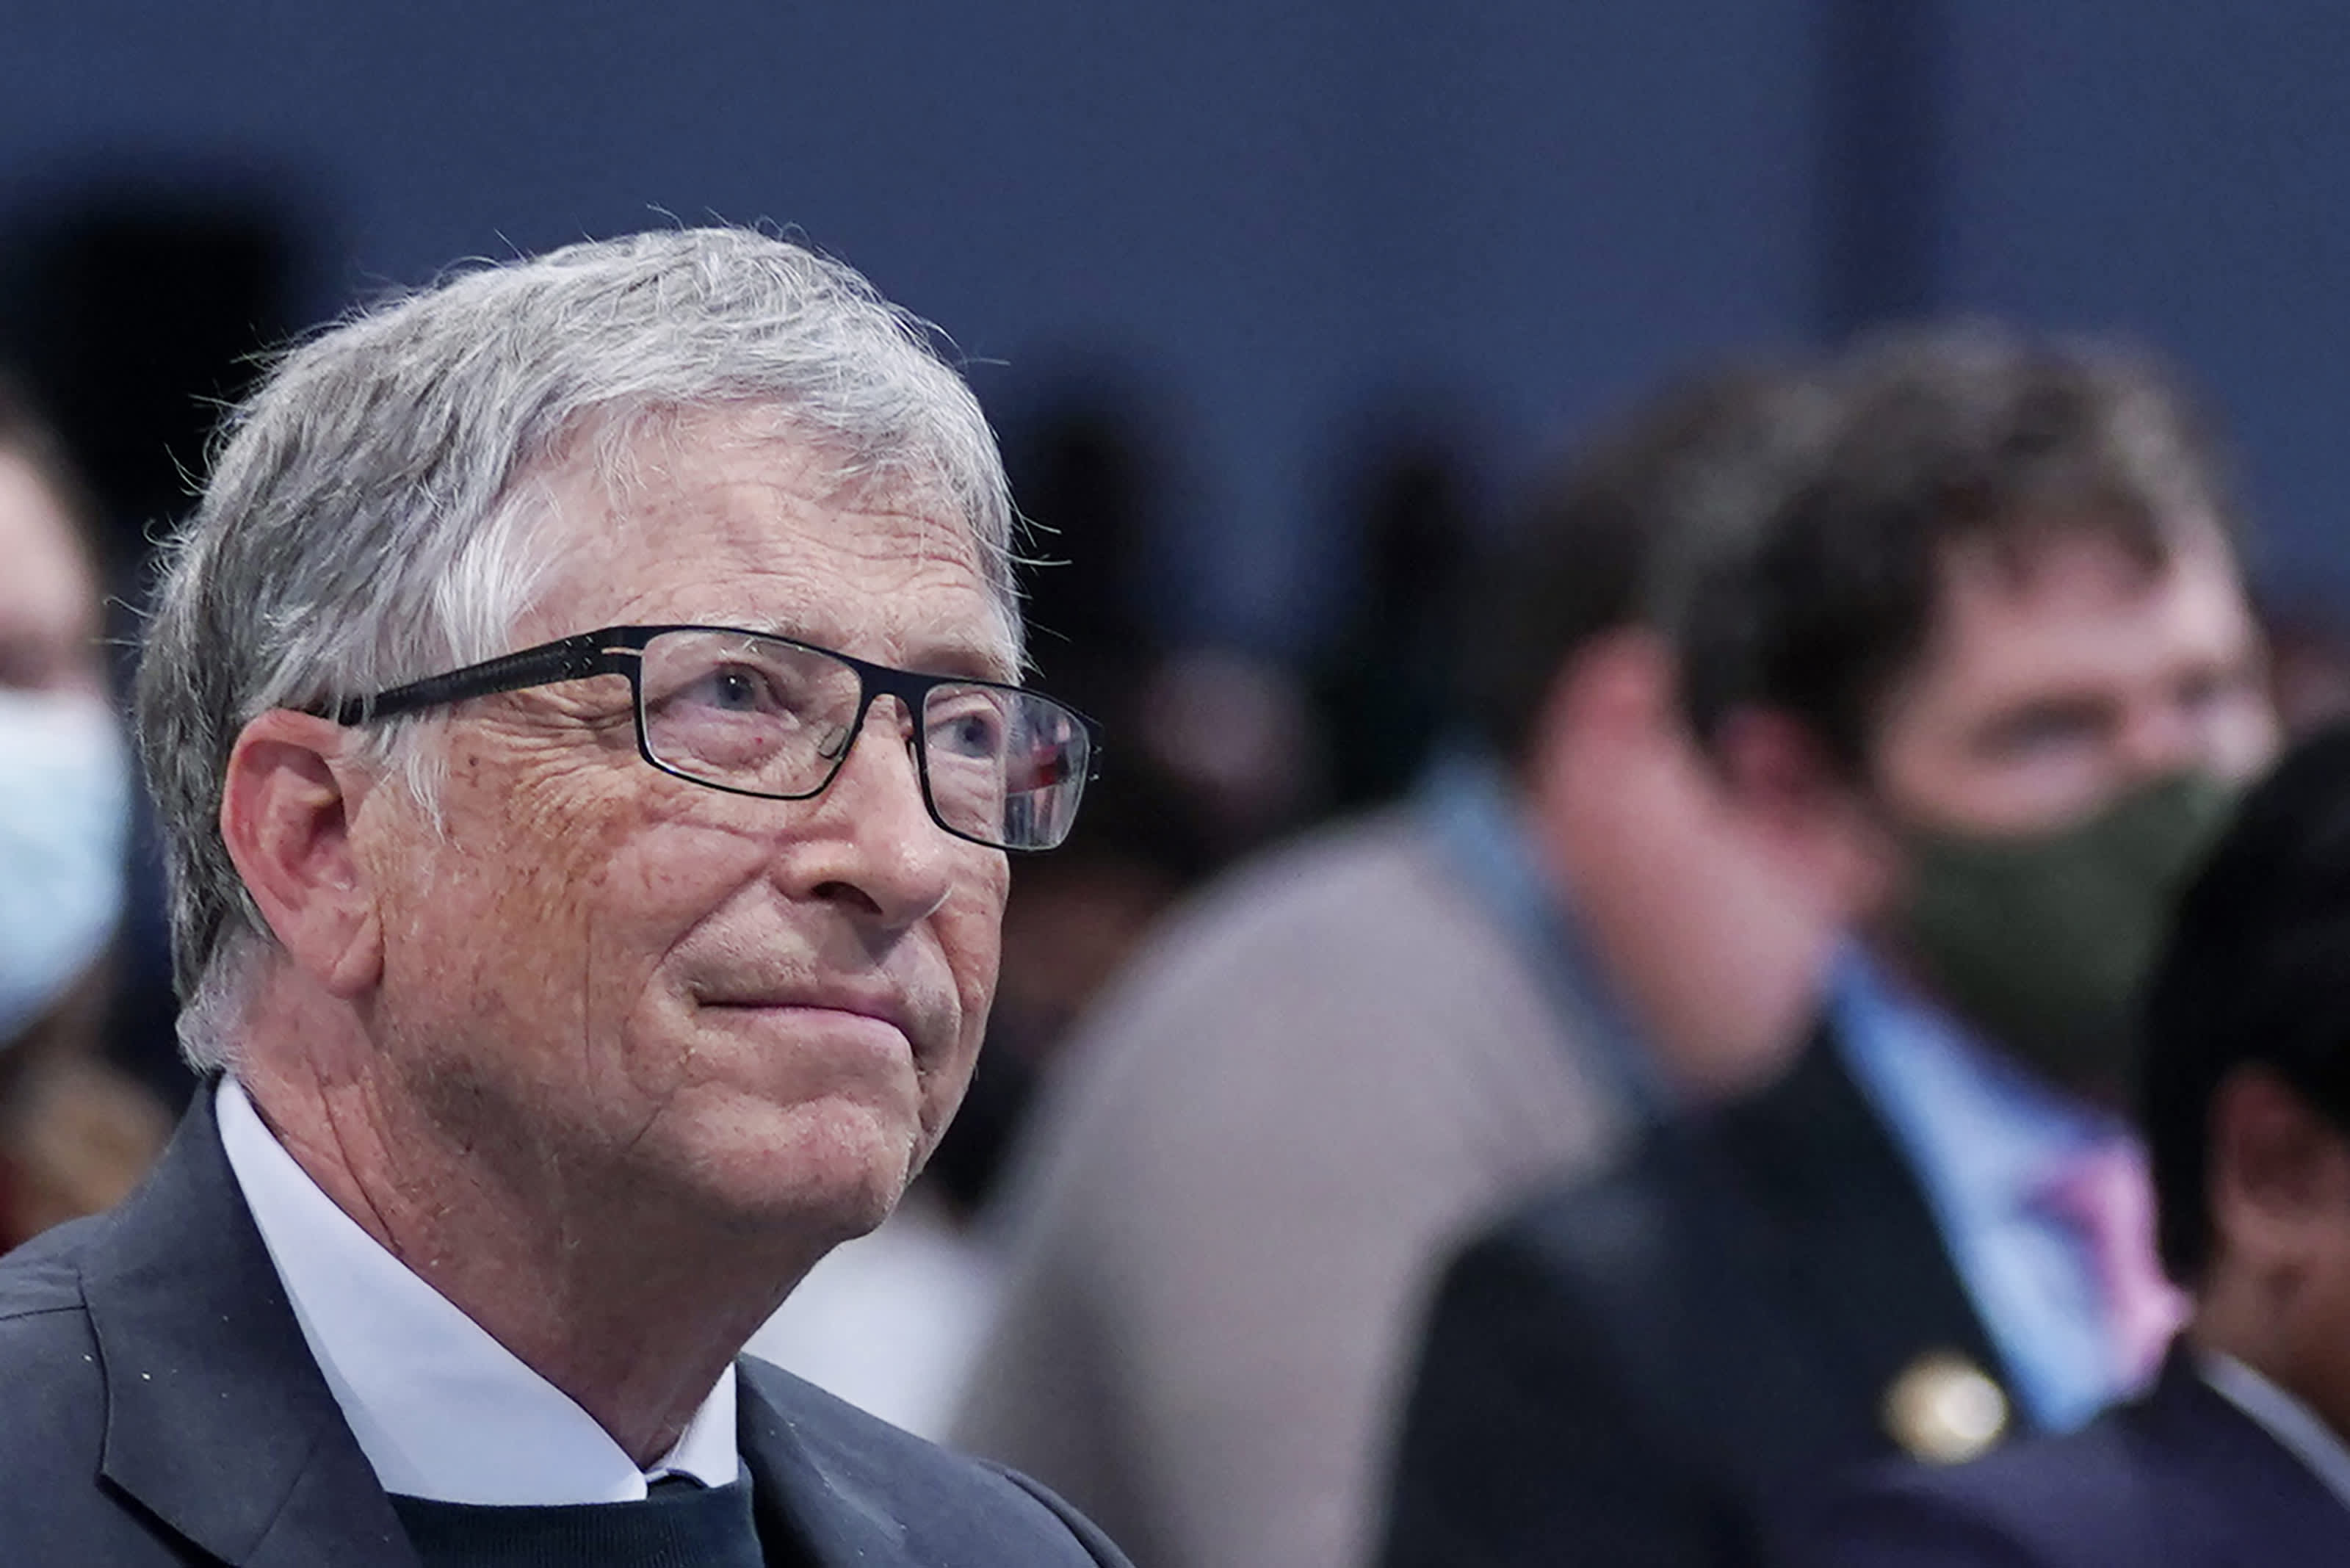 Bill Gates BEC climate fund plans to invest $15 billion in clean tech